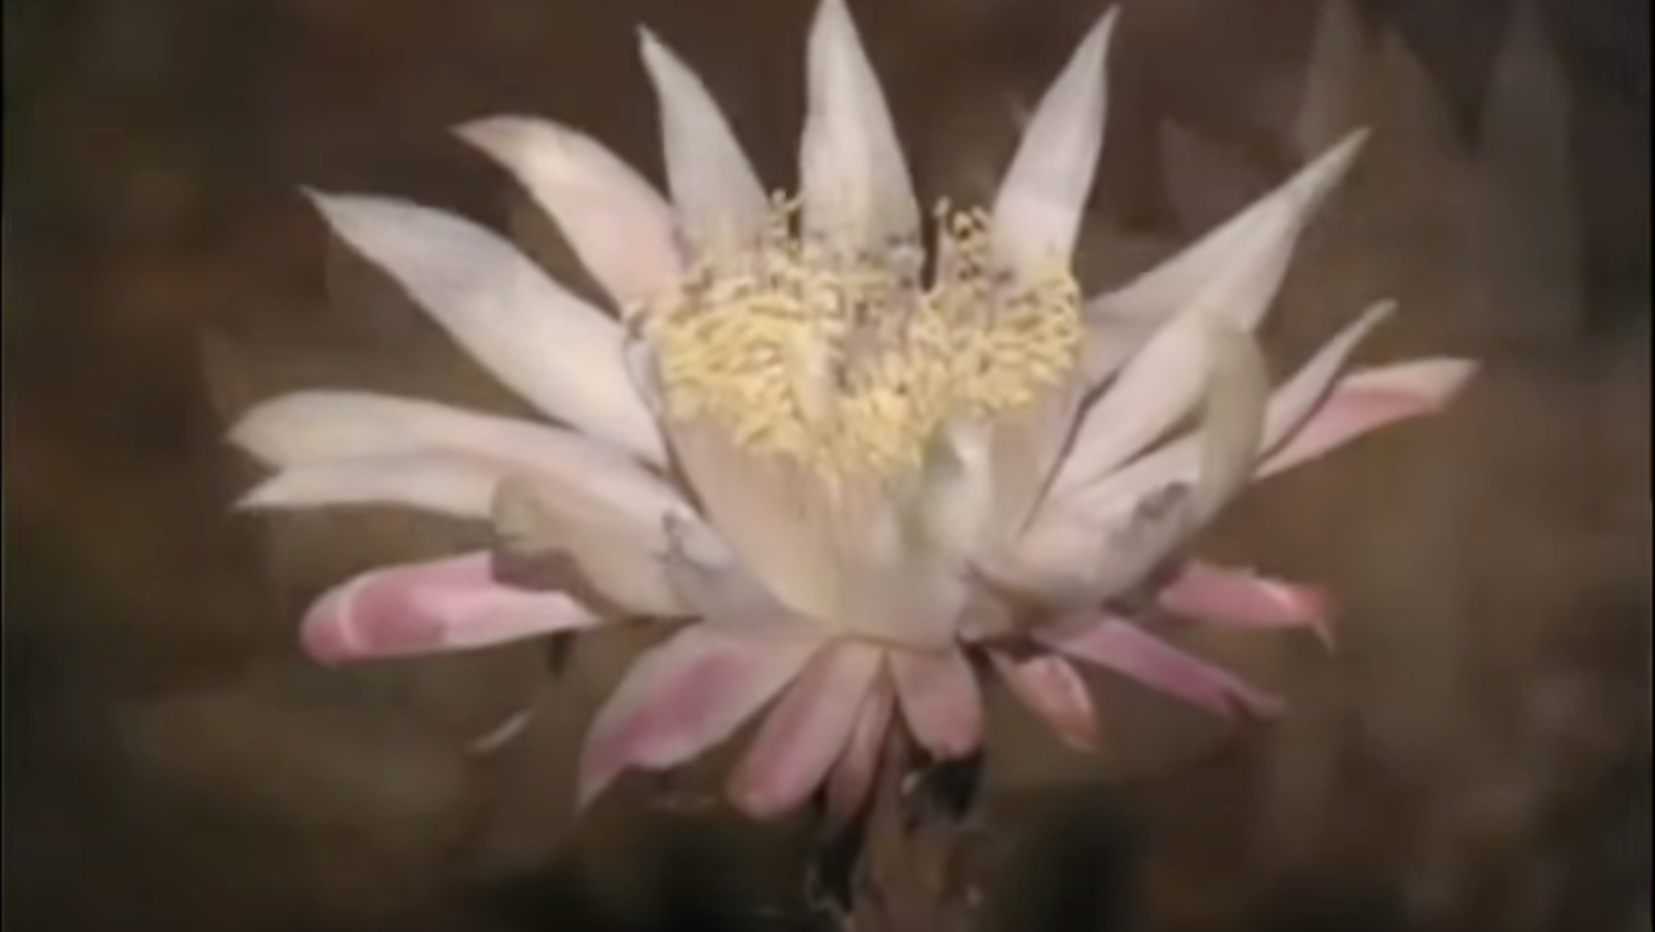 Load video: Video about the Arizona cactus flower Queen of the Night